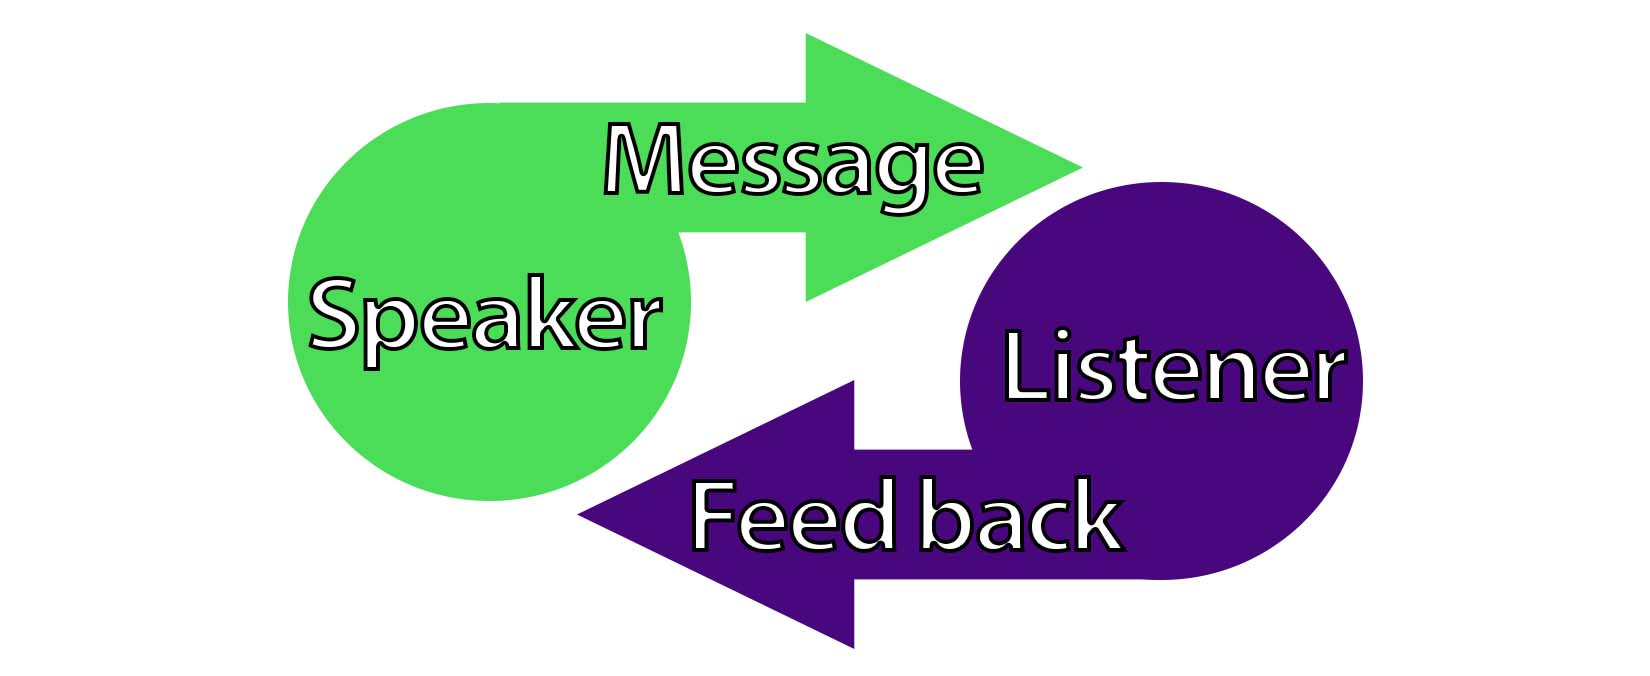 This graph illustrates the internactional model of communication. one side we have a circle labeled "speaker" with an arrow labeled "message" extending towards the second circle. On the opposite side this other circle is labeled "listener" and it has an arrow labeled "feedback" which points back towards the circle labeled "speaker."